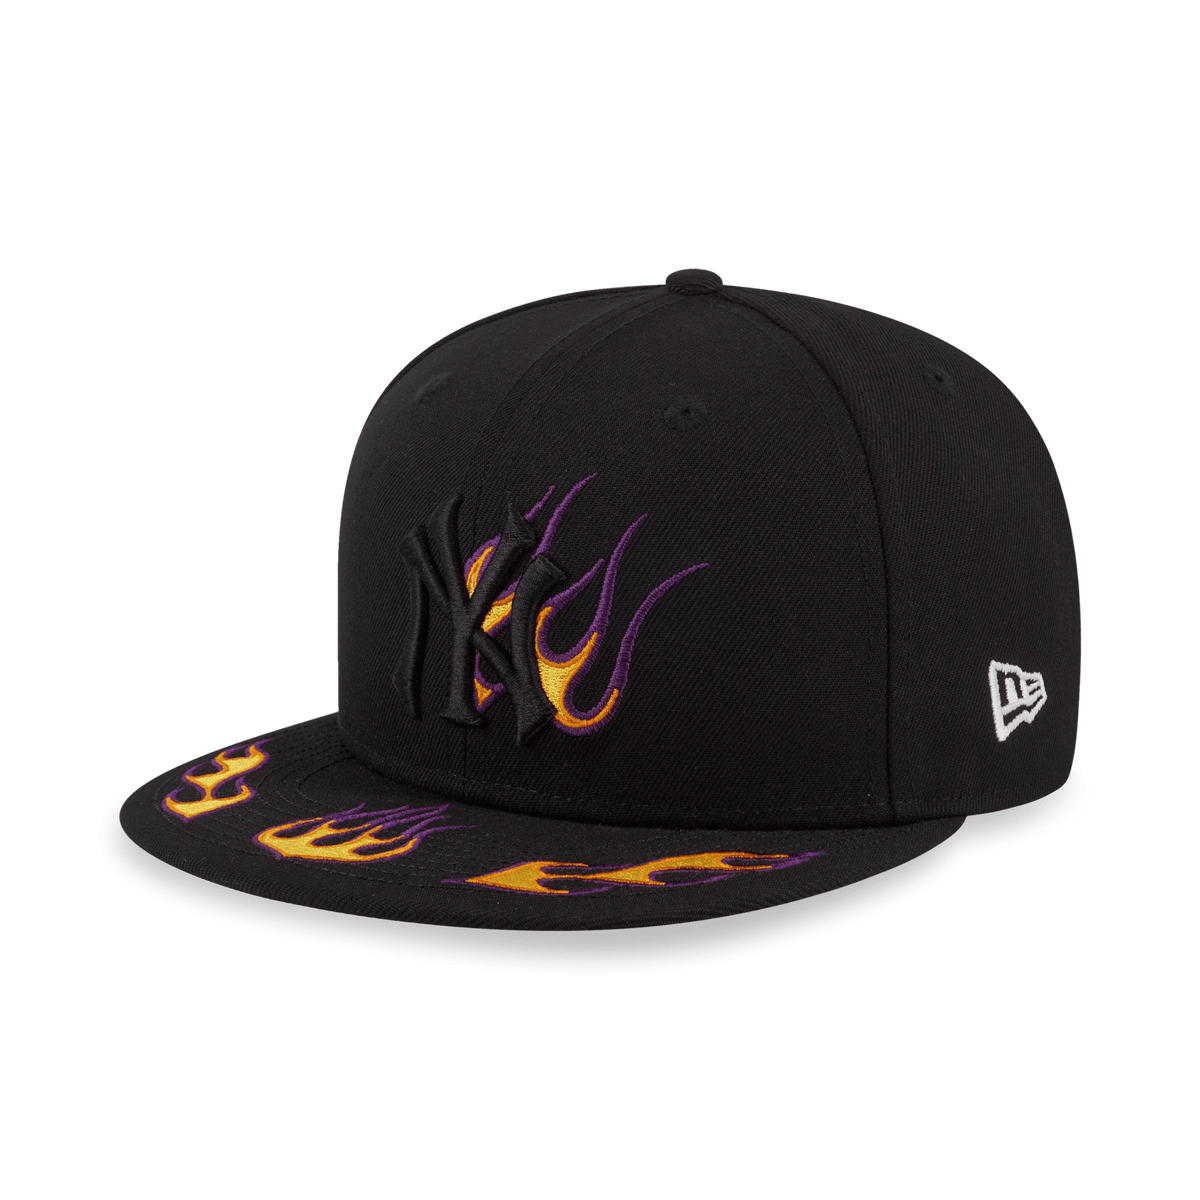 59FIFTY Flame ニューヨーク・ヤンキース ブラック